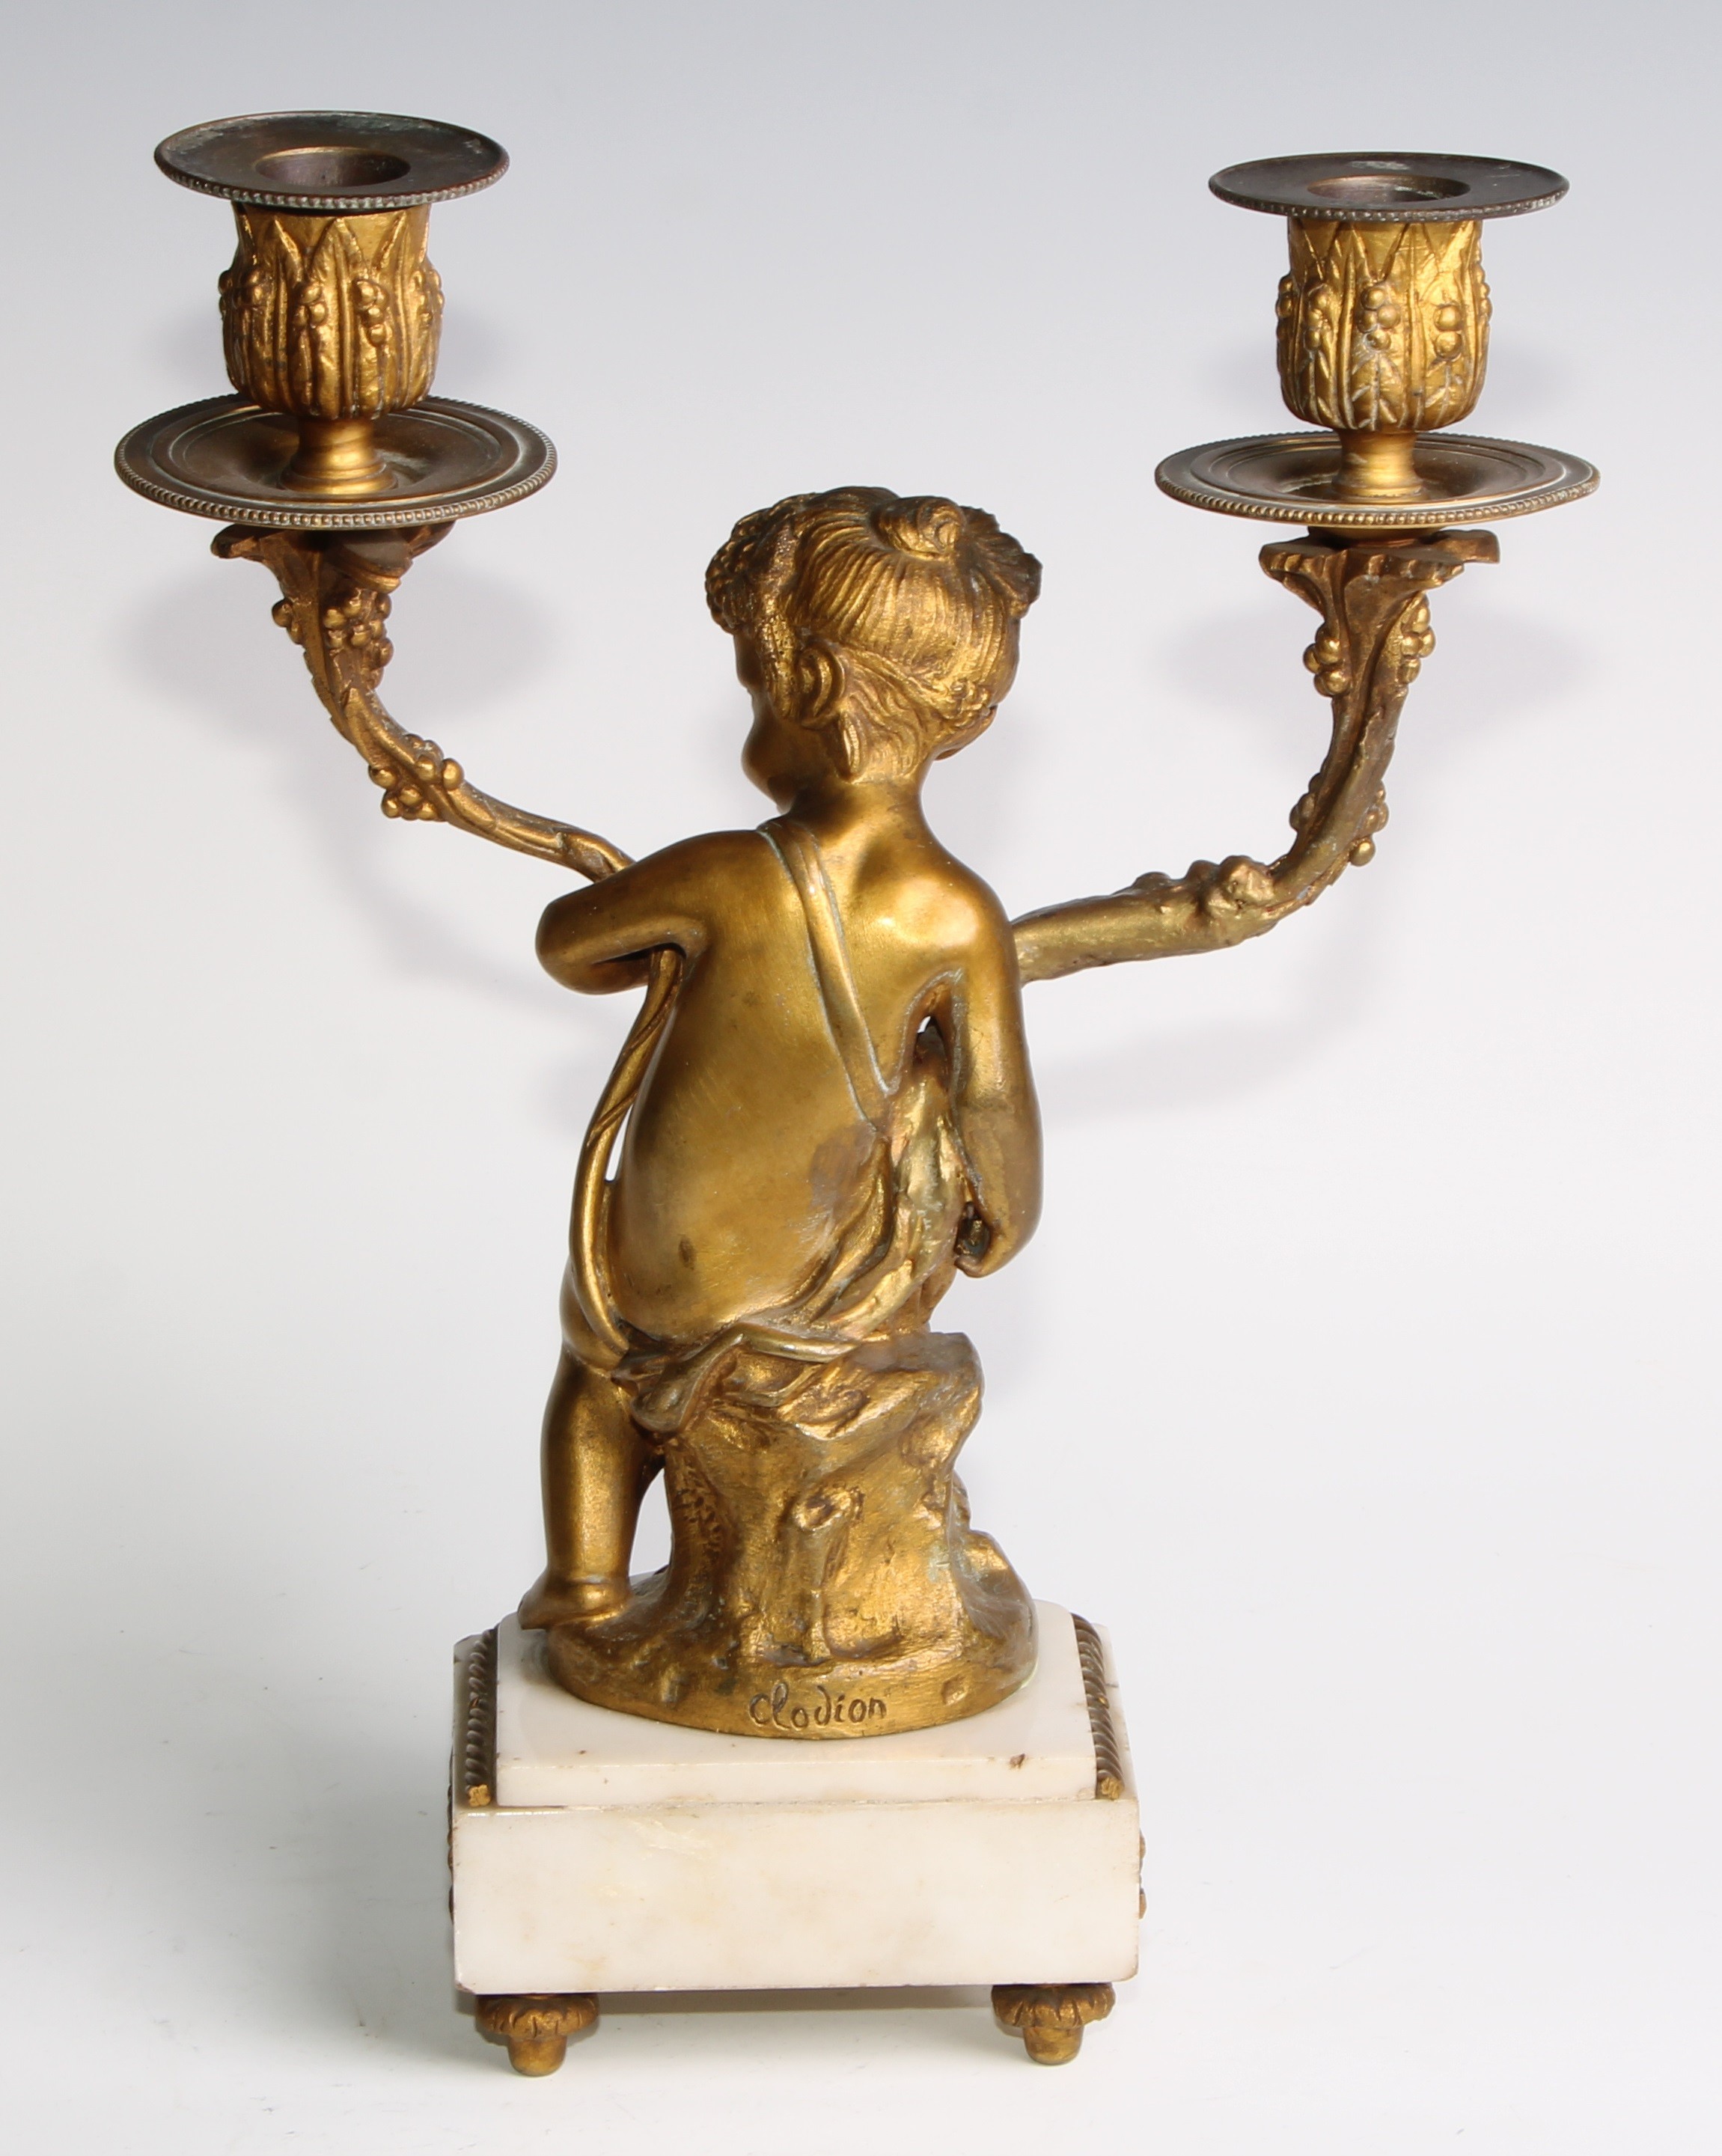 A pair of 19th century French bronze figural two-light candelabra, after Clodion (1738 - 1814), - Image 6 of 12